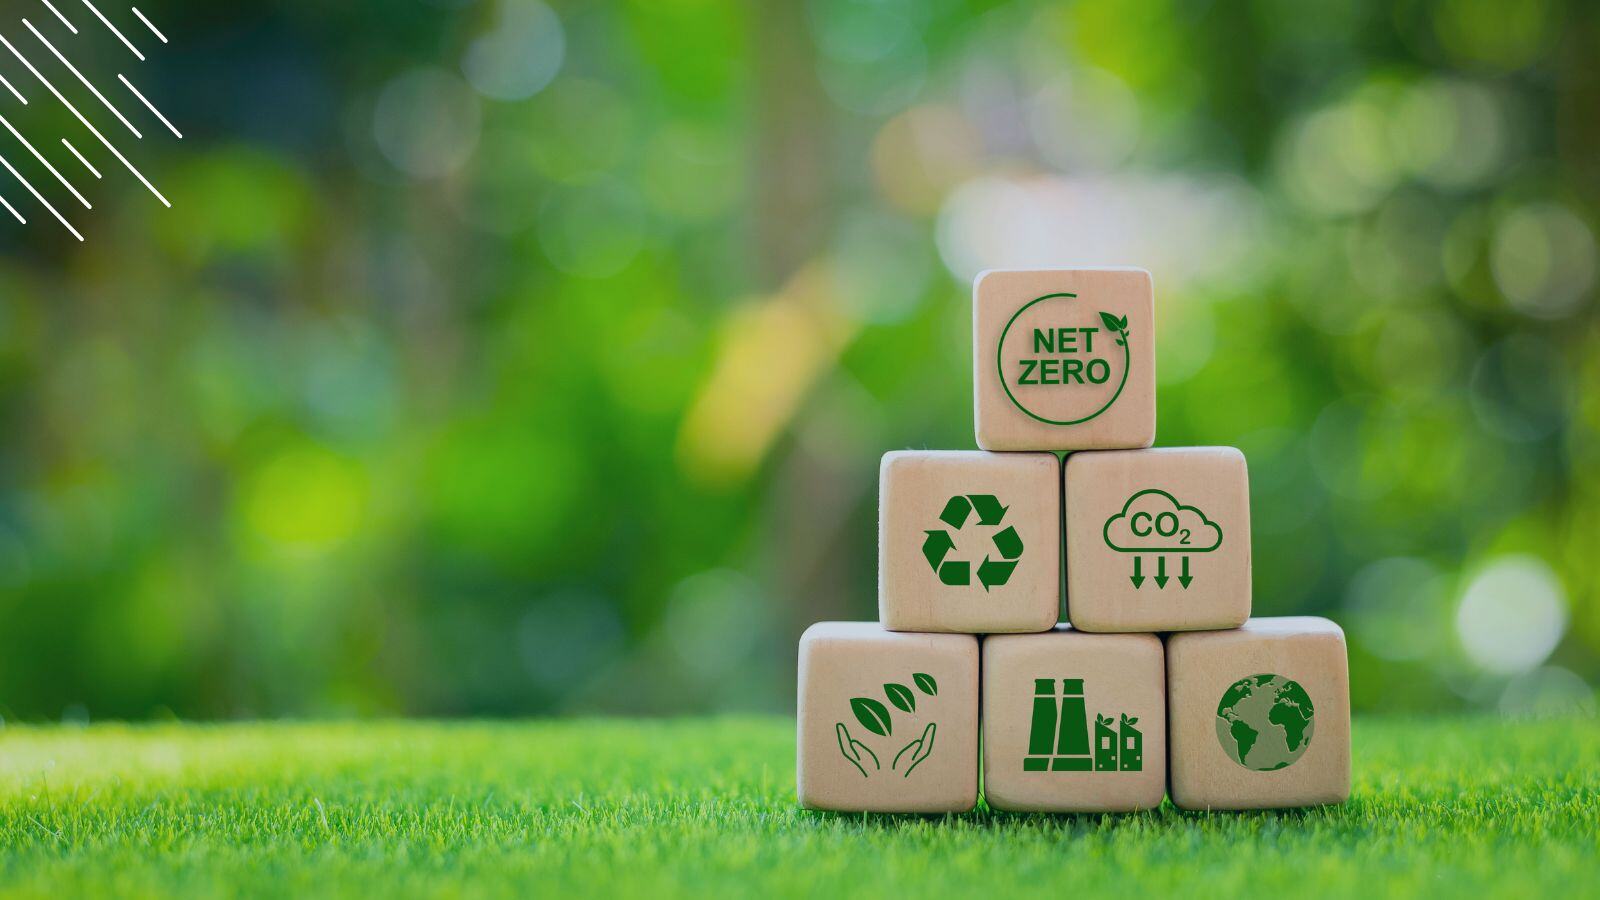 Achieving sustainability goals with Device Lifecycle Management